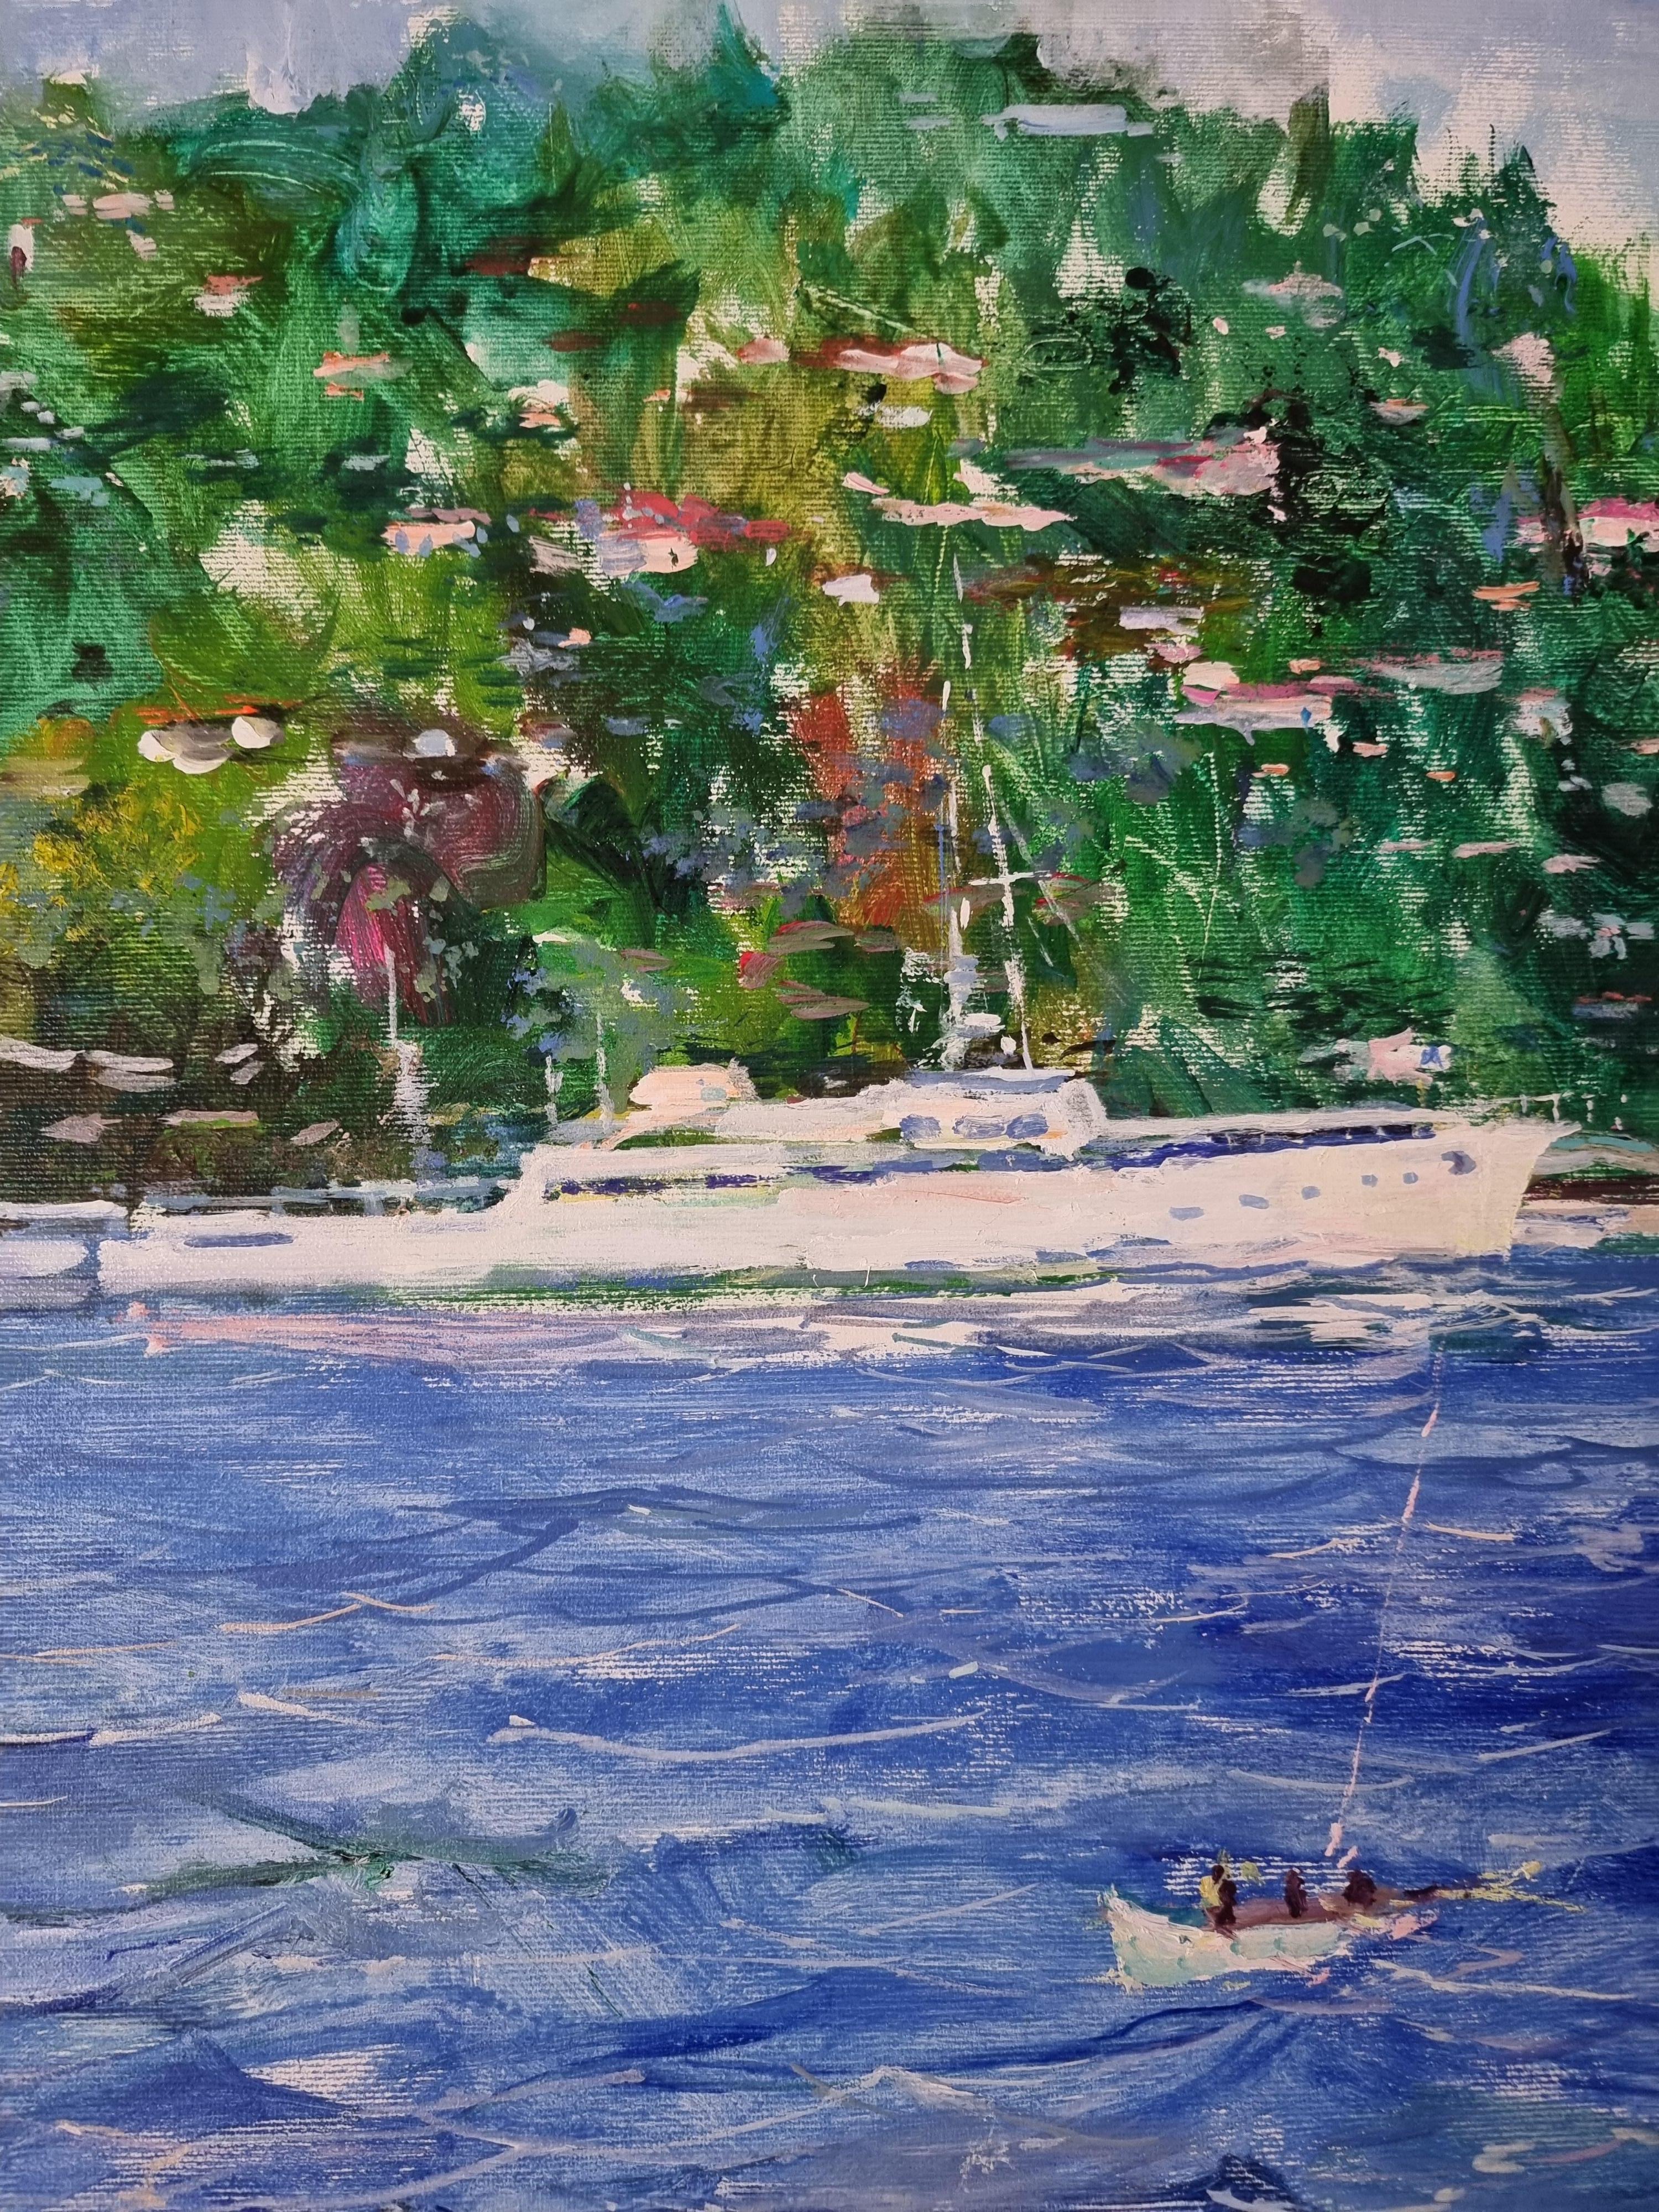  Scorpios Island Greece Christina Onassis Yacht - Landscape Painting For Sale 1